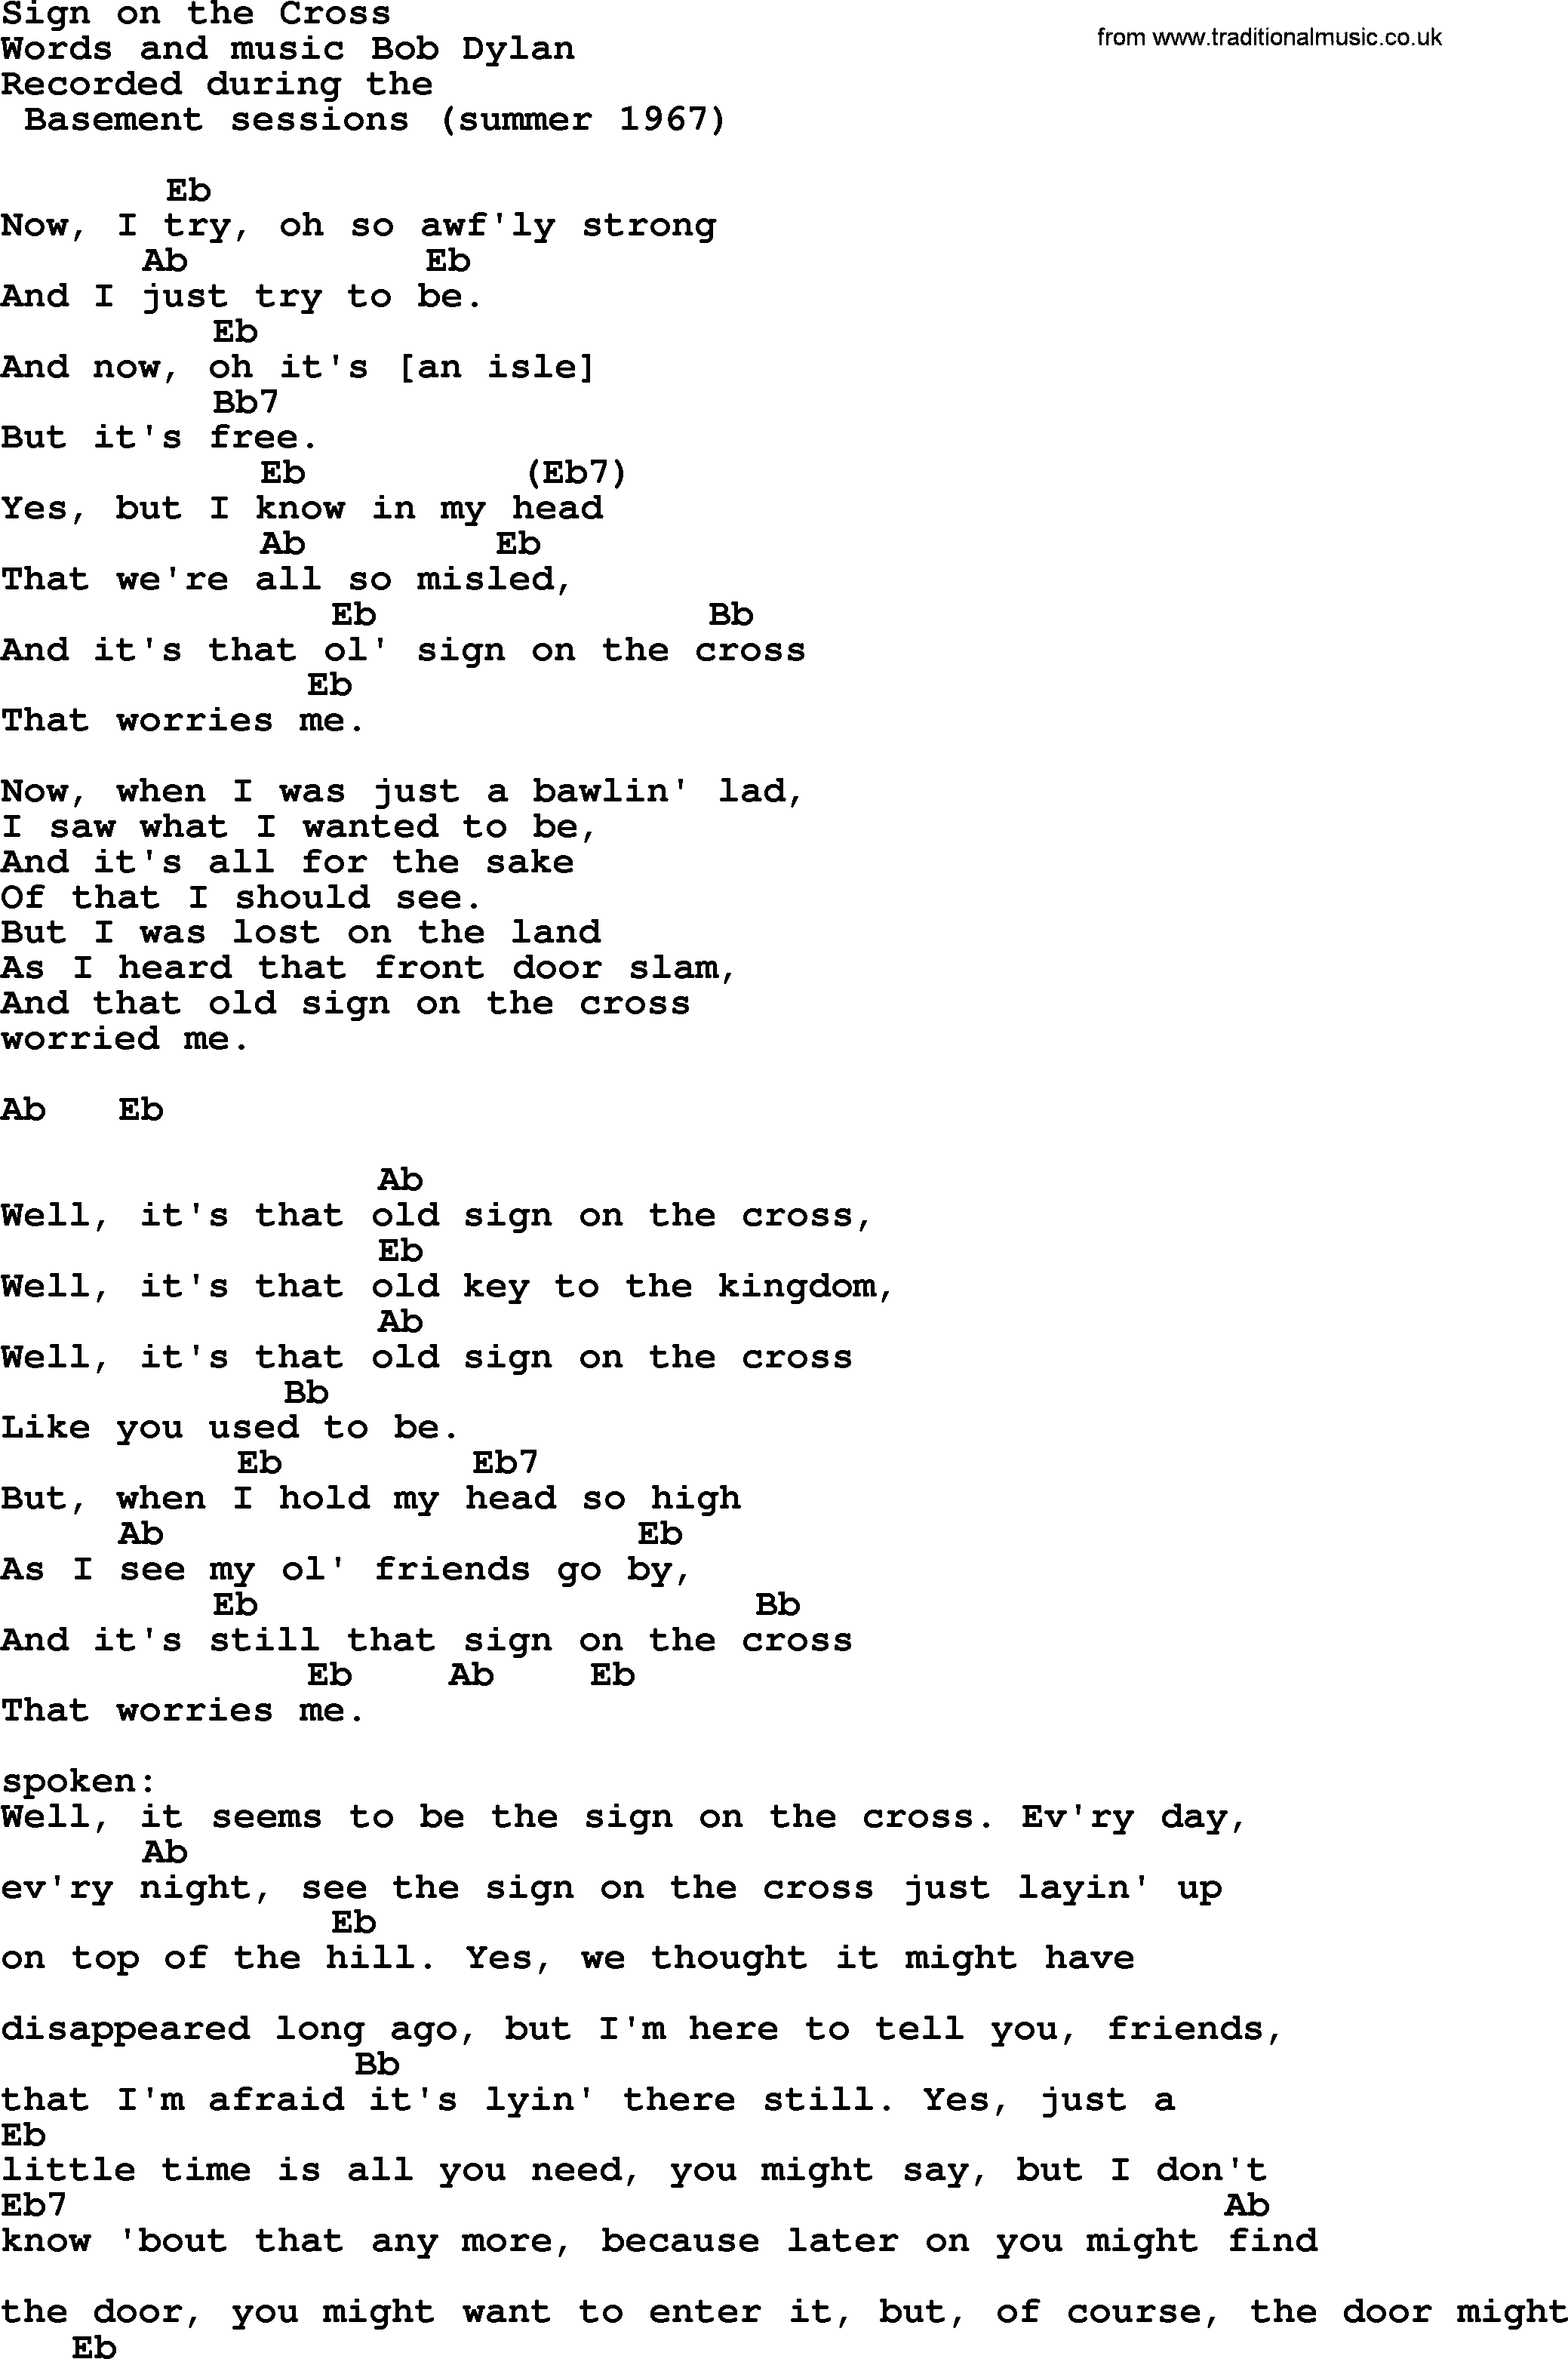 Bob Dylan song - Sign on the Cross, lyrics and chords